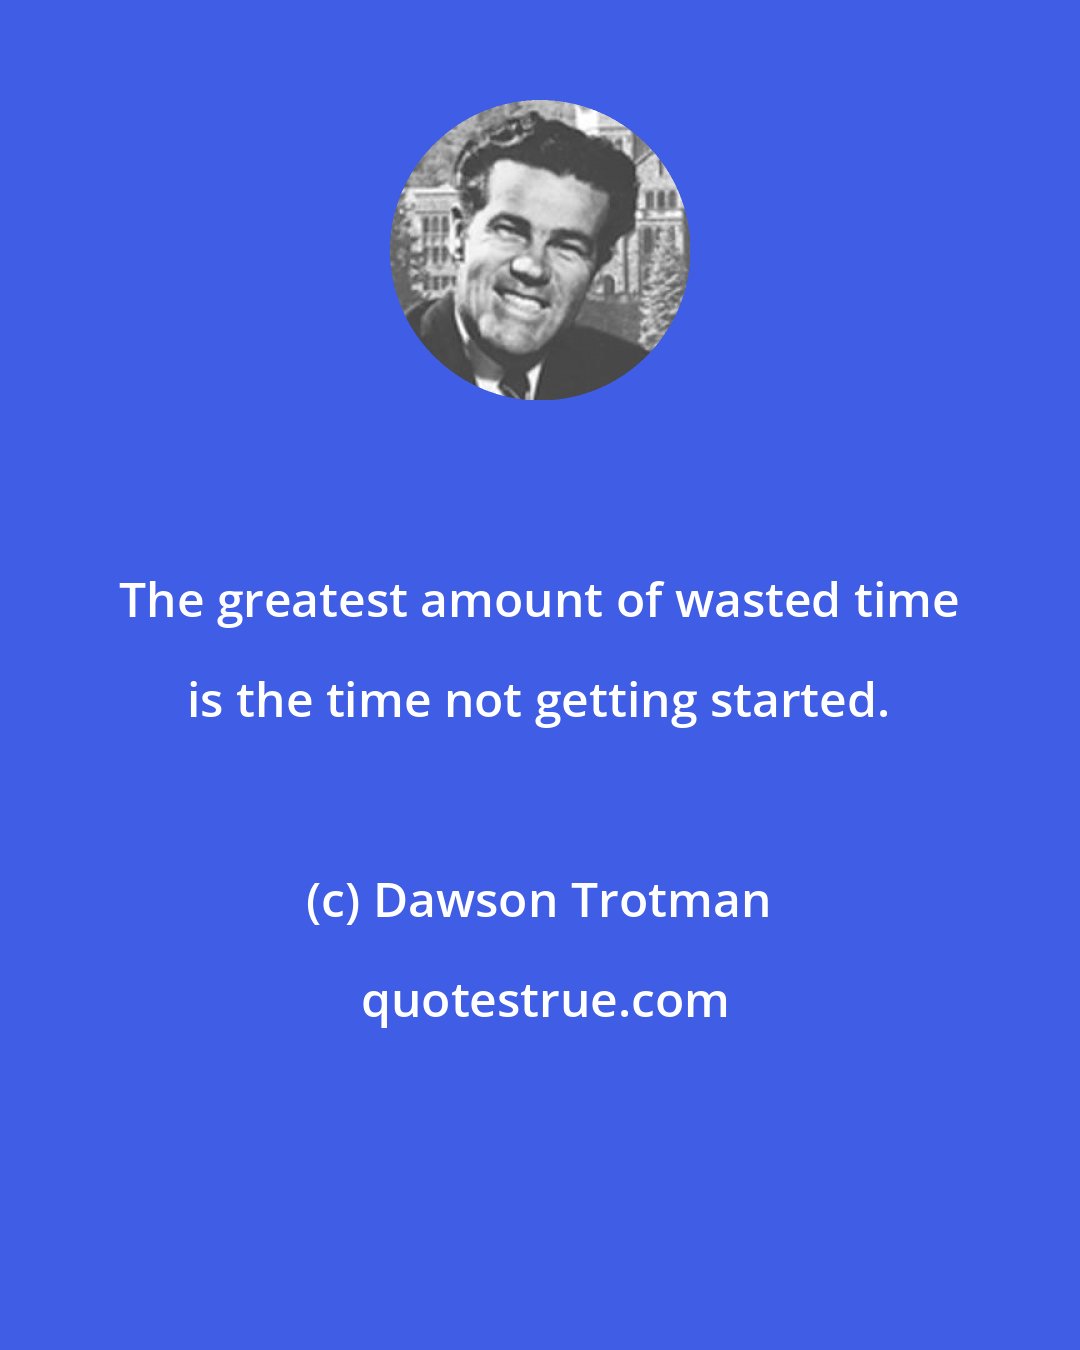 Dawson Trotman: The greatest amount of wasted time is the time not getting started.